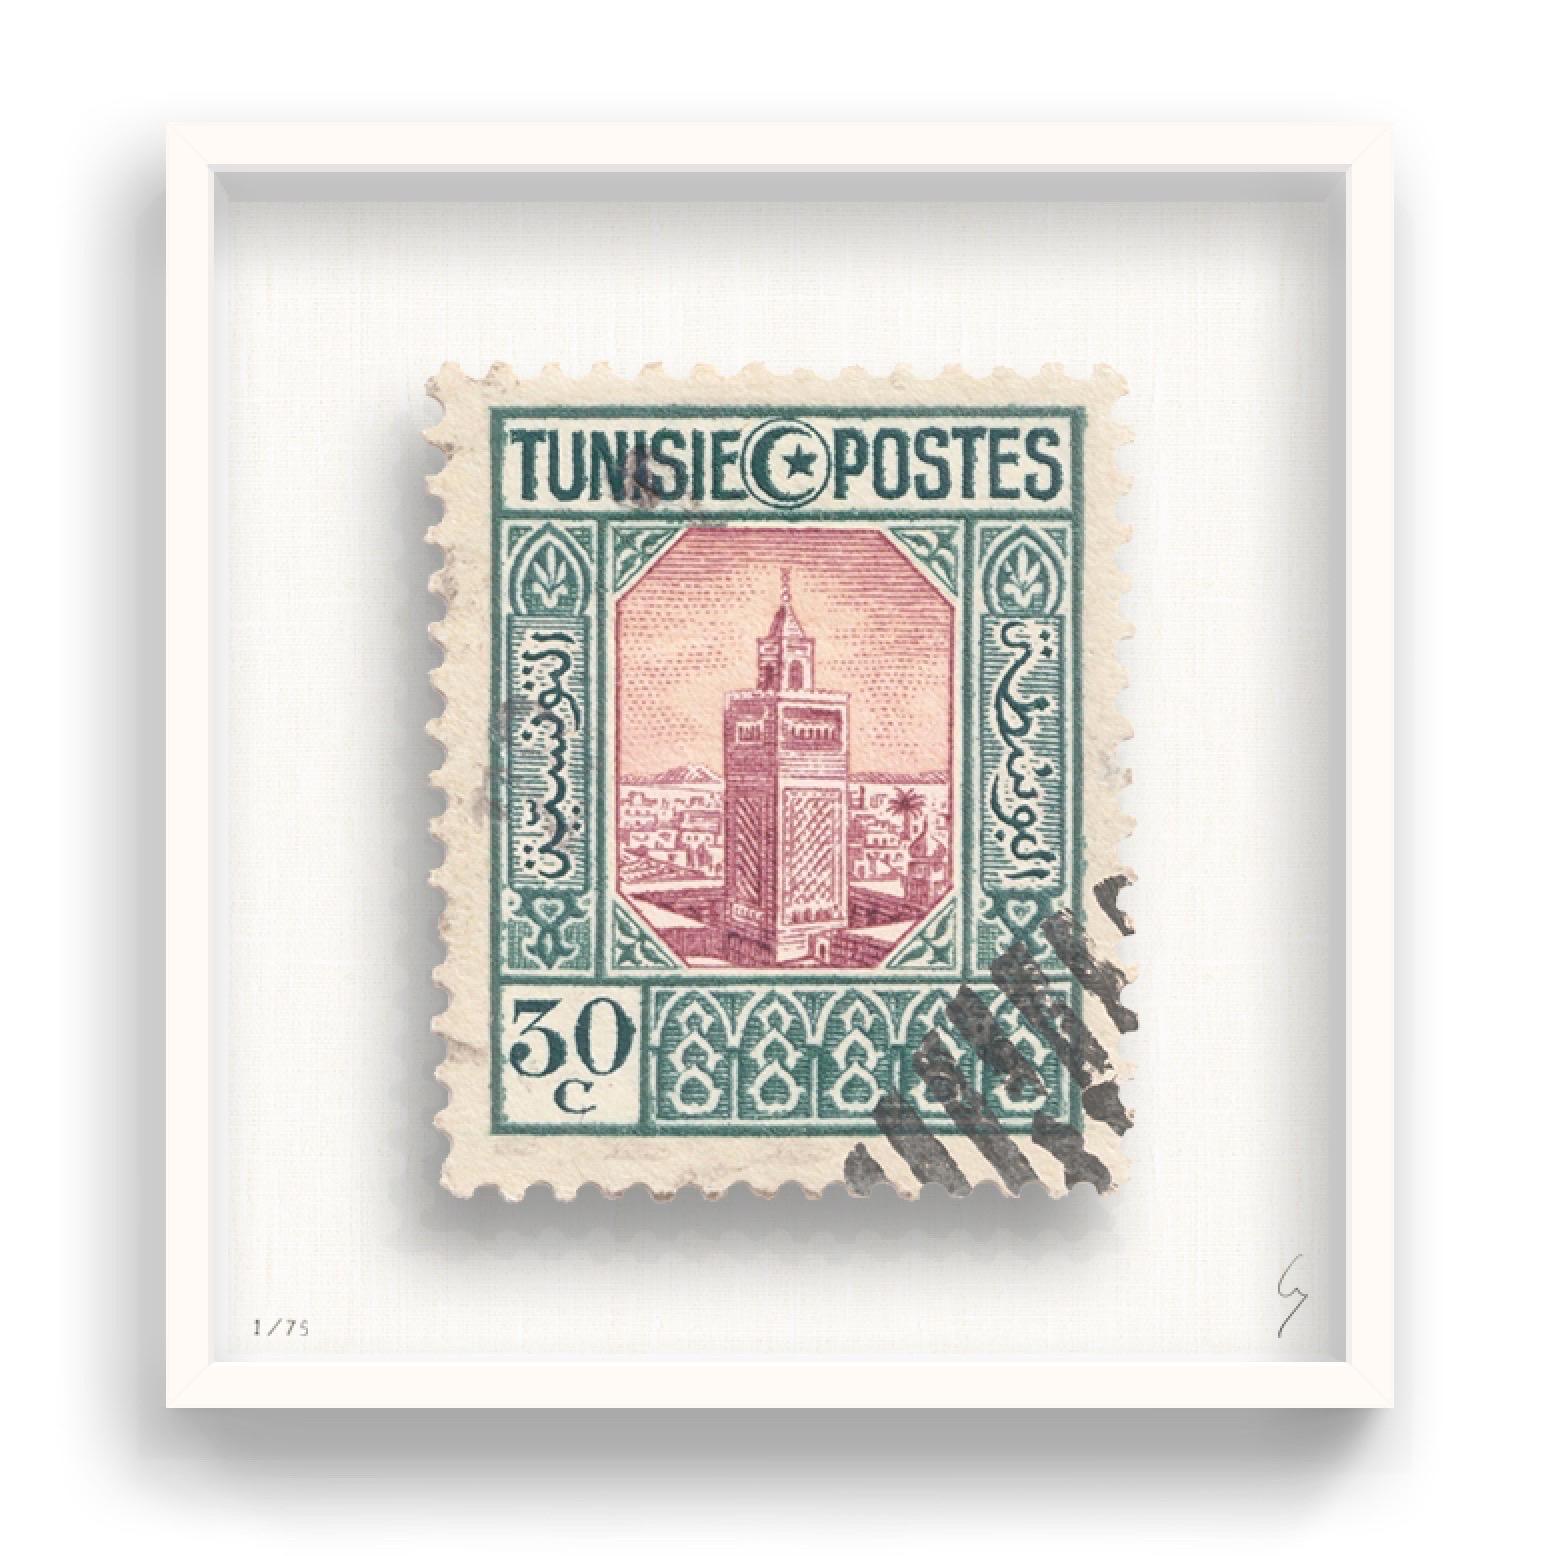 Guy Gee, Tunisia (medium)

Hand-engraved print on 350gsm on G.F Smith card
31 x 35 cm (12 1/5 x 13 4/5)
Frame included 
Edition of 75 

Each artwork by Guy had been digitally reimagined from an original postage stamp. Cut out and finished by hand,